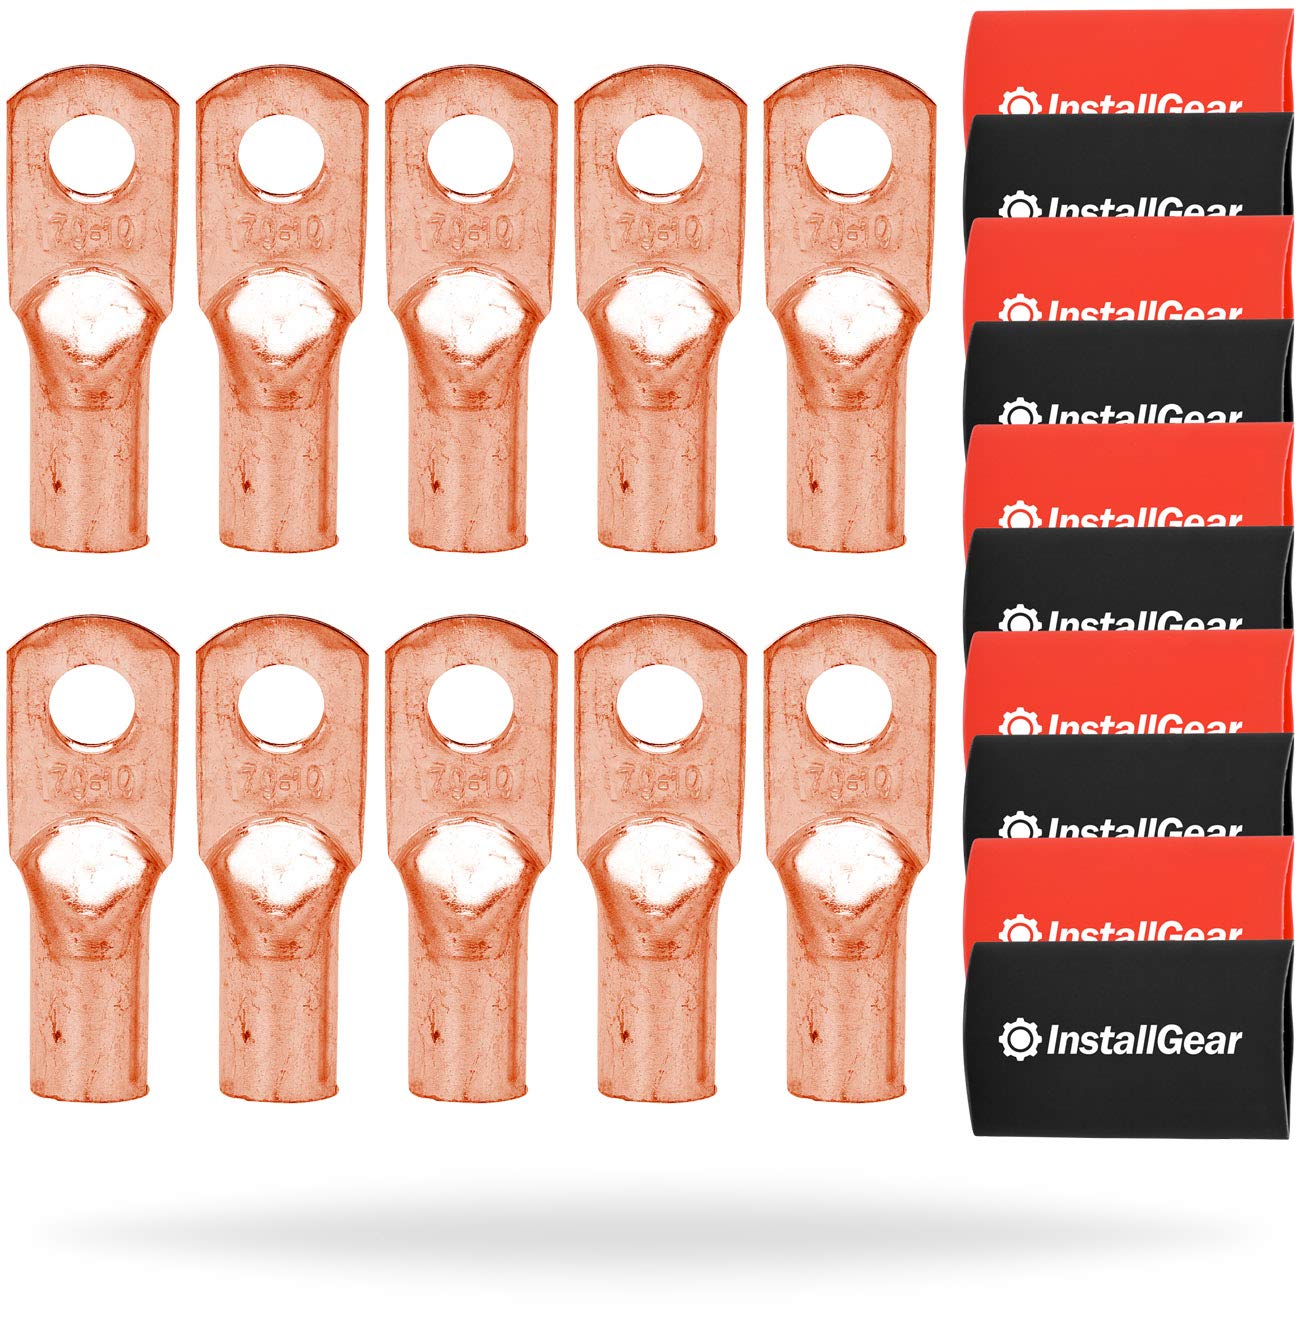 InstallGear 1/0 Gauge AWG Tinned Pure Copper Lug Ring Terminals Connectors 10-pack